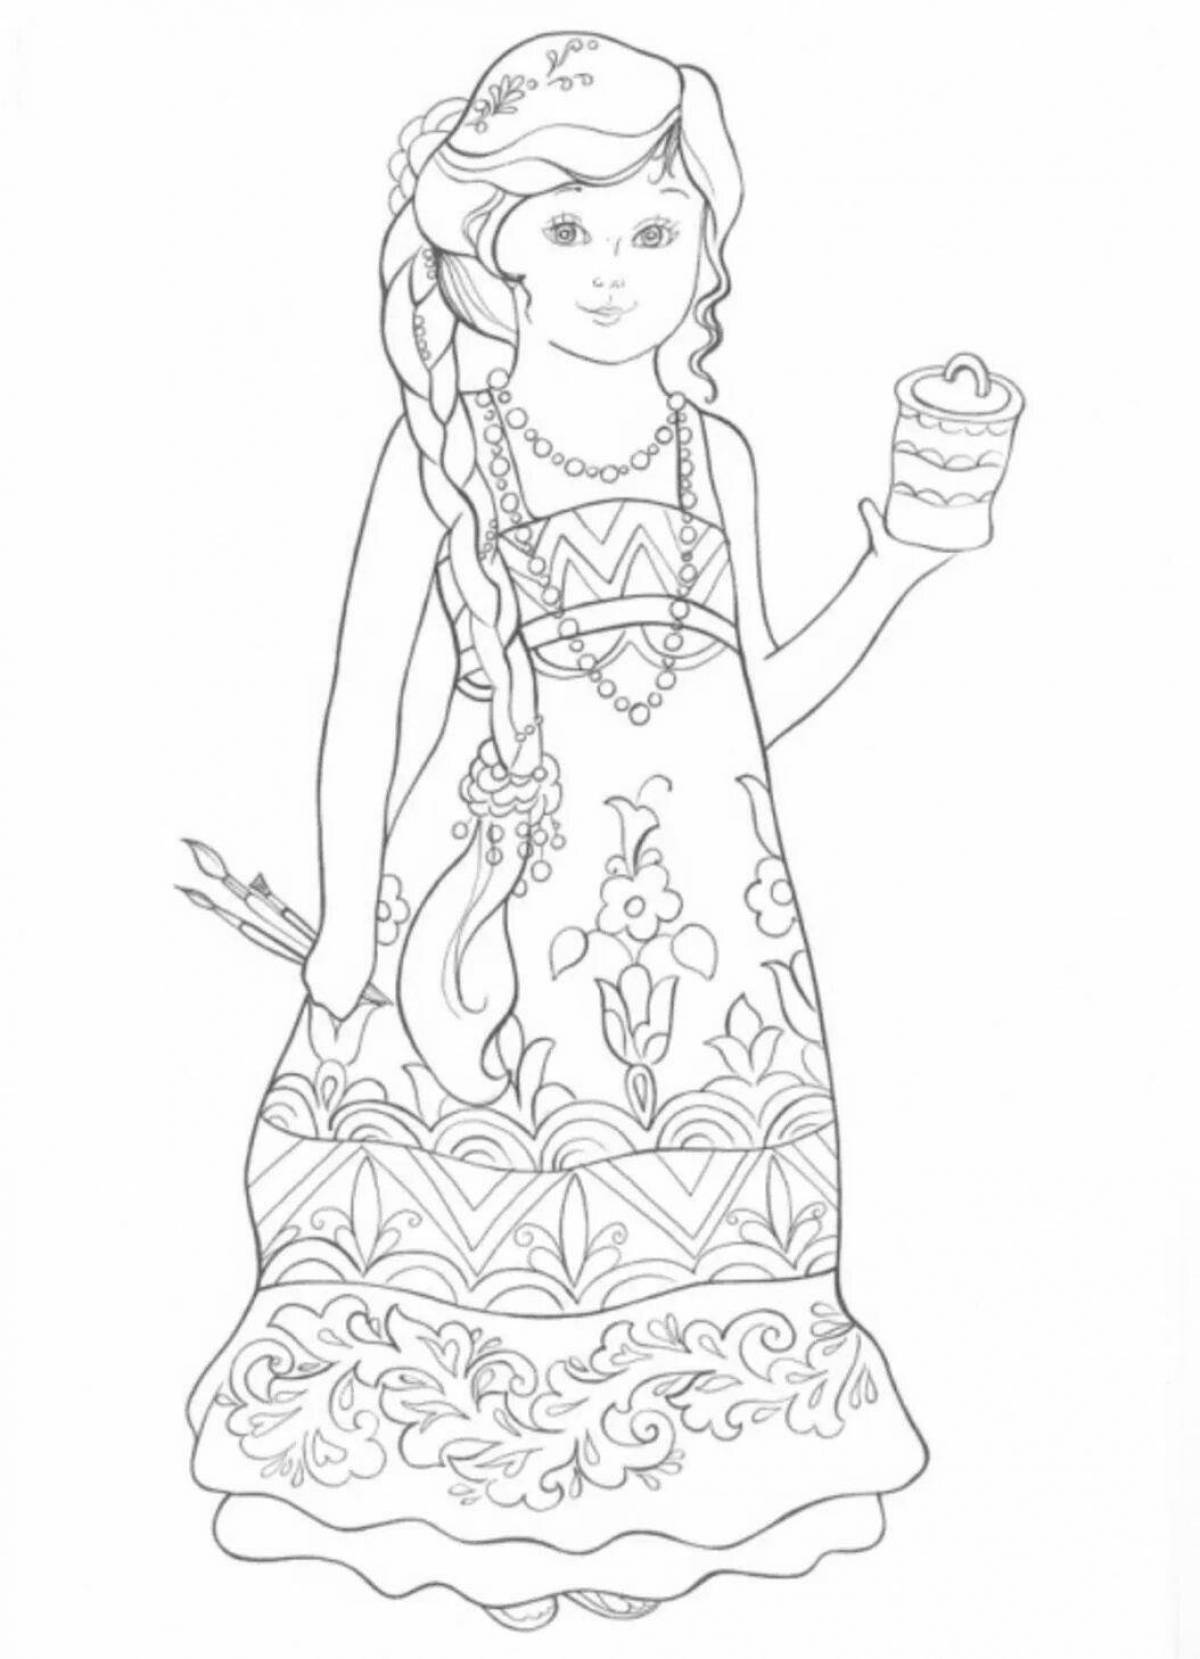 Fancy sundress coloring book for kids